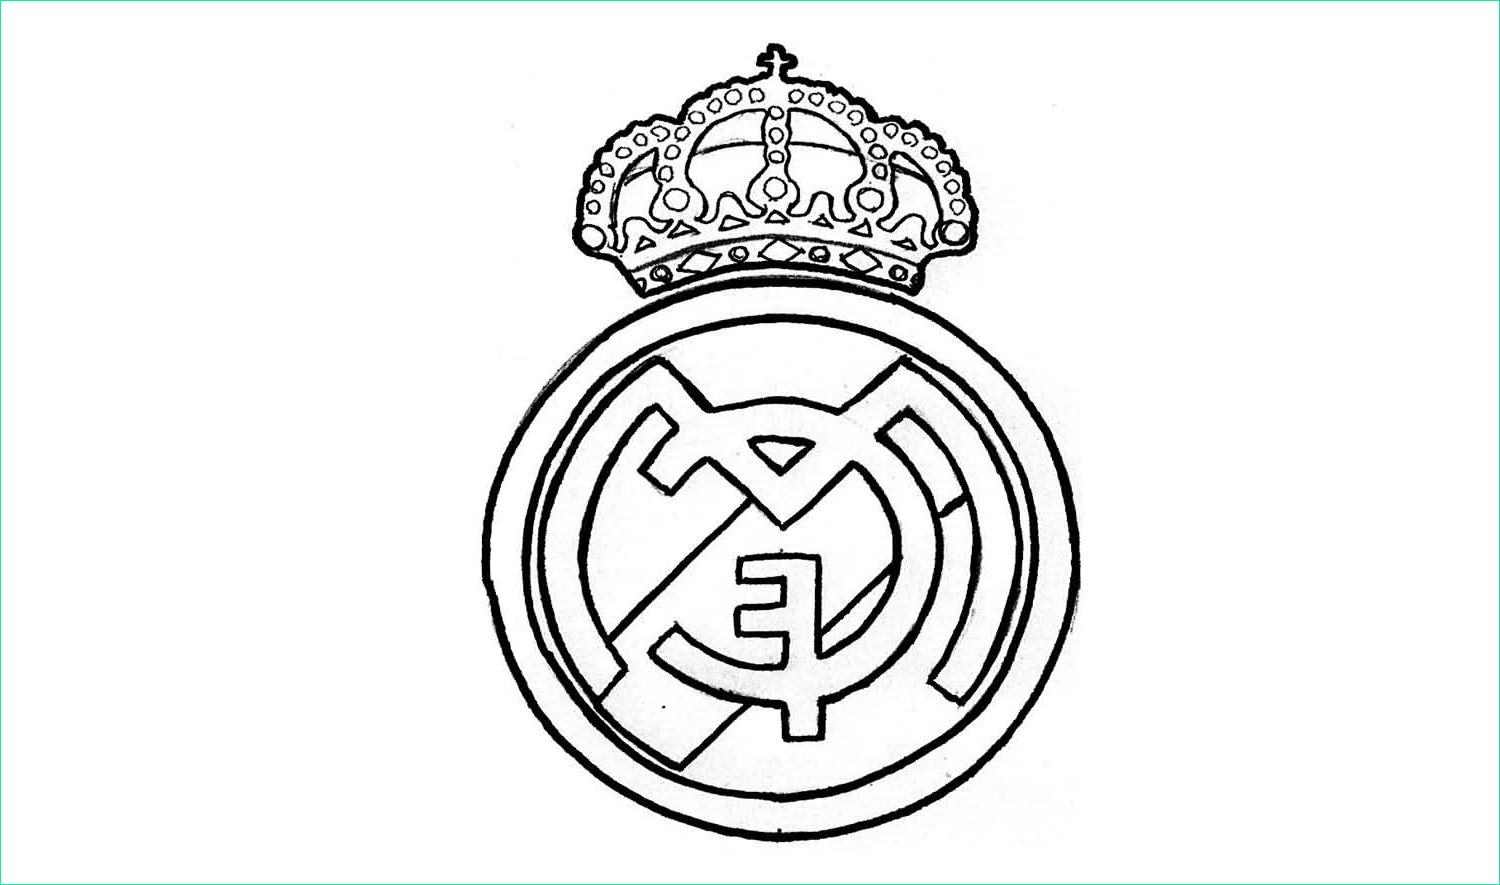 Real Madrid Dessin Élégant Collection Real Madrid Logo Drawing at Getdrawings